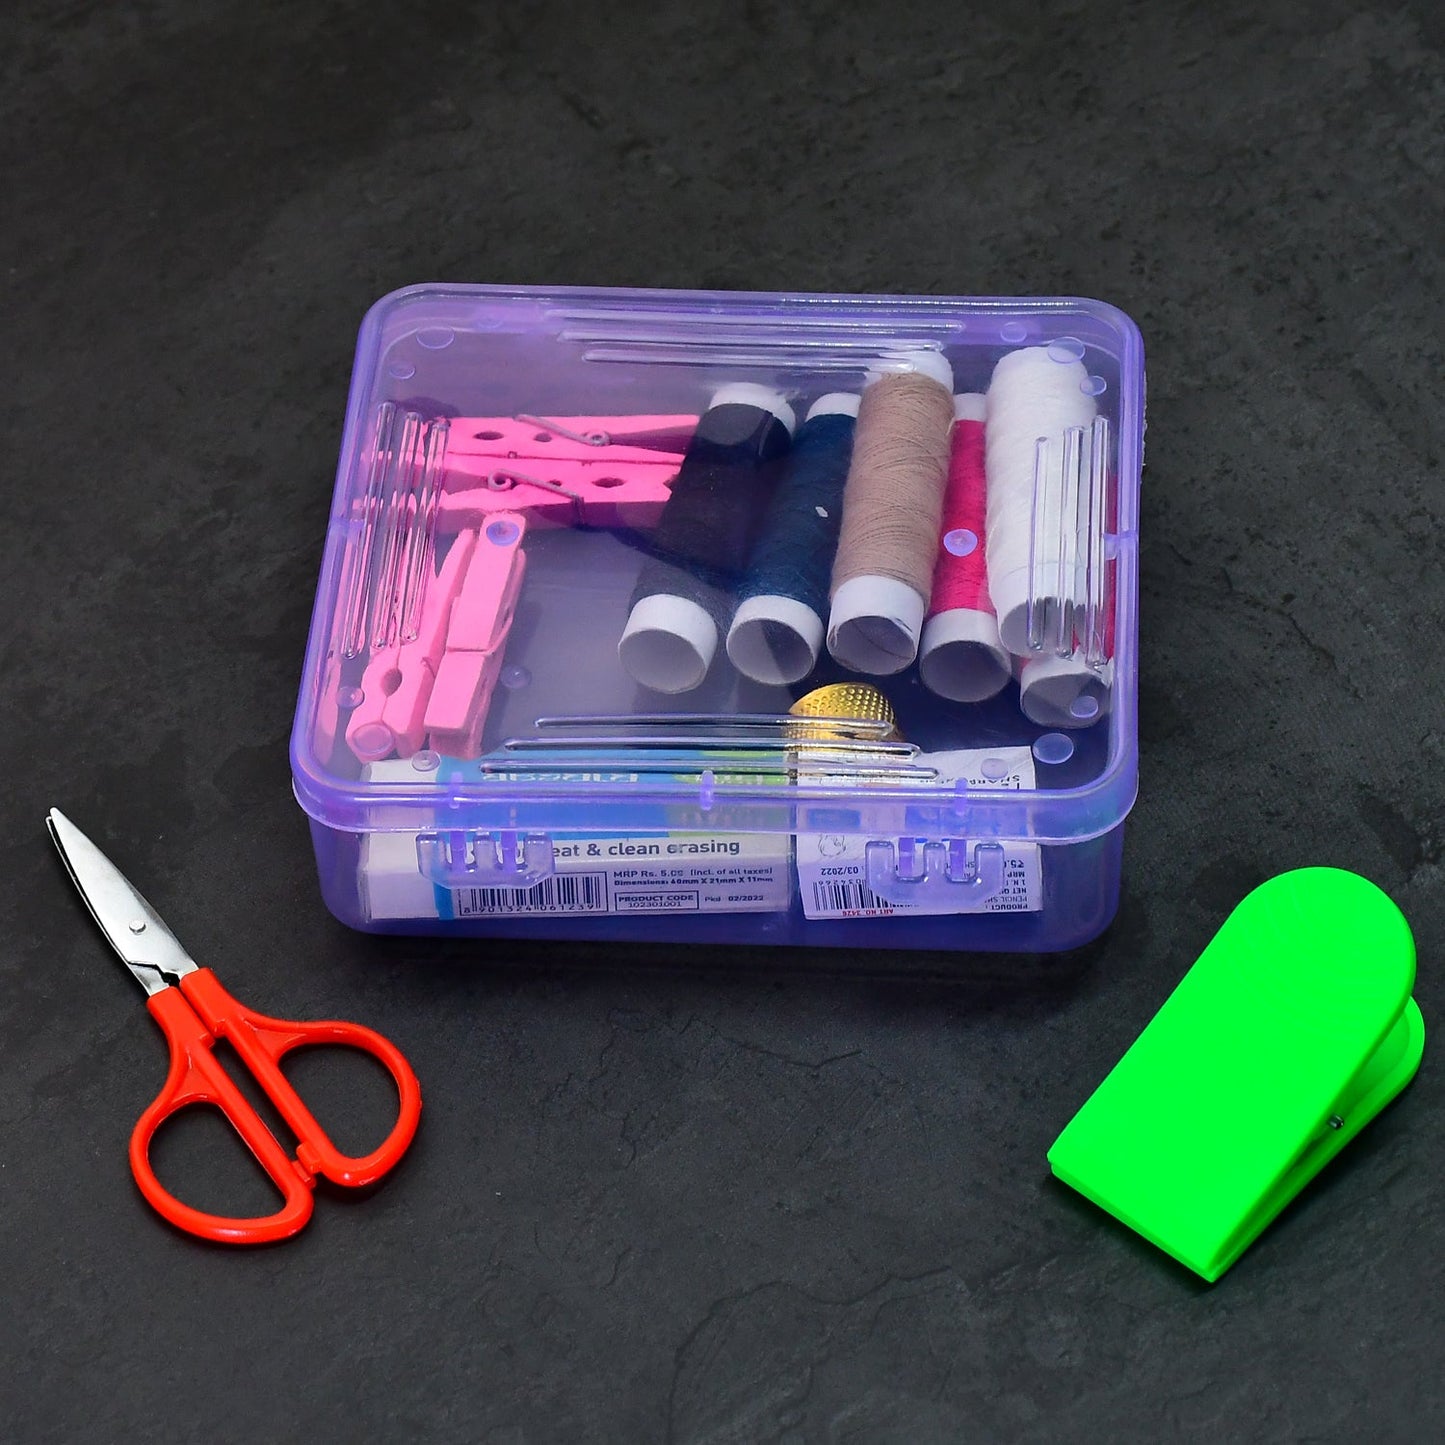 plastic container used for storing things and stuffs and can also be used in any kind of places.